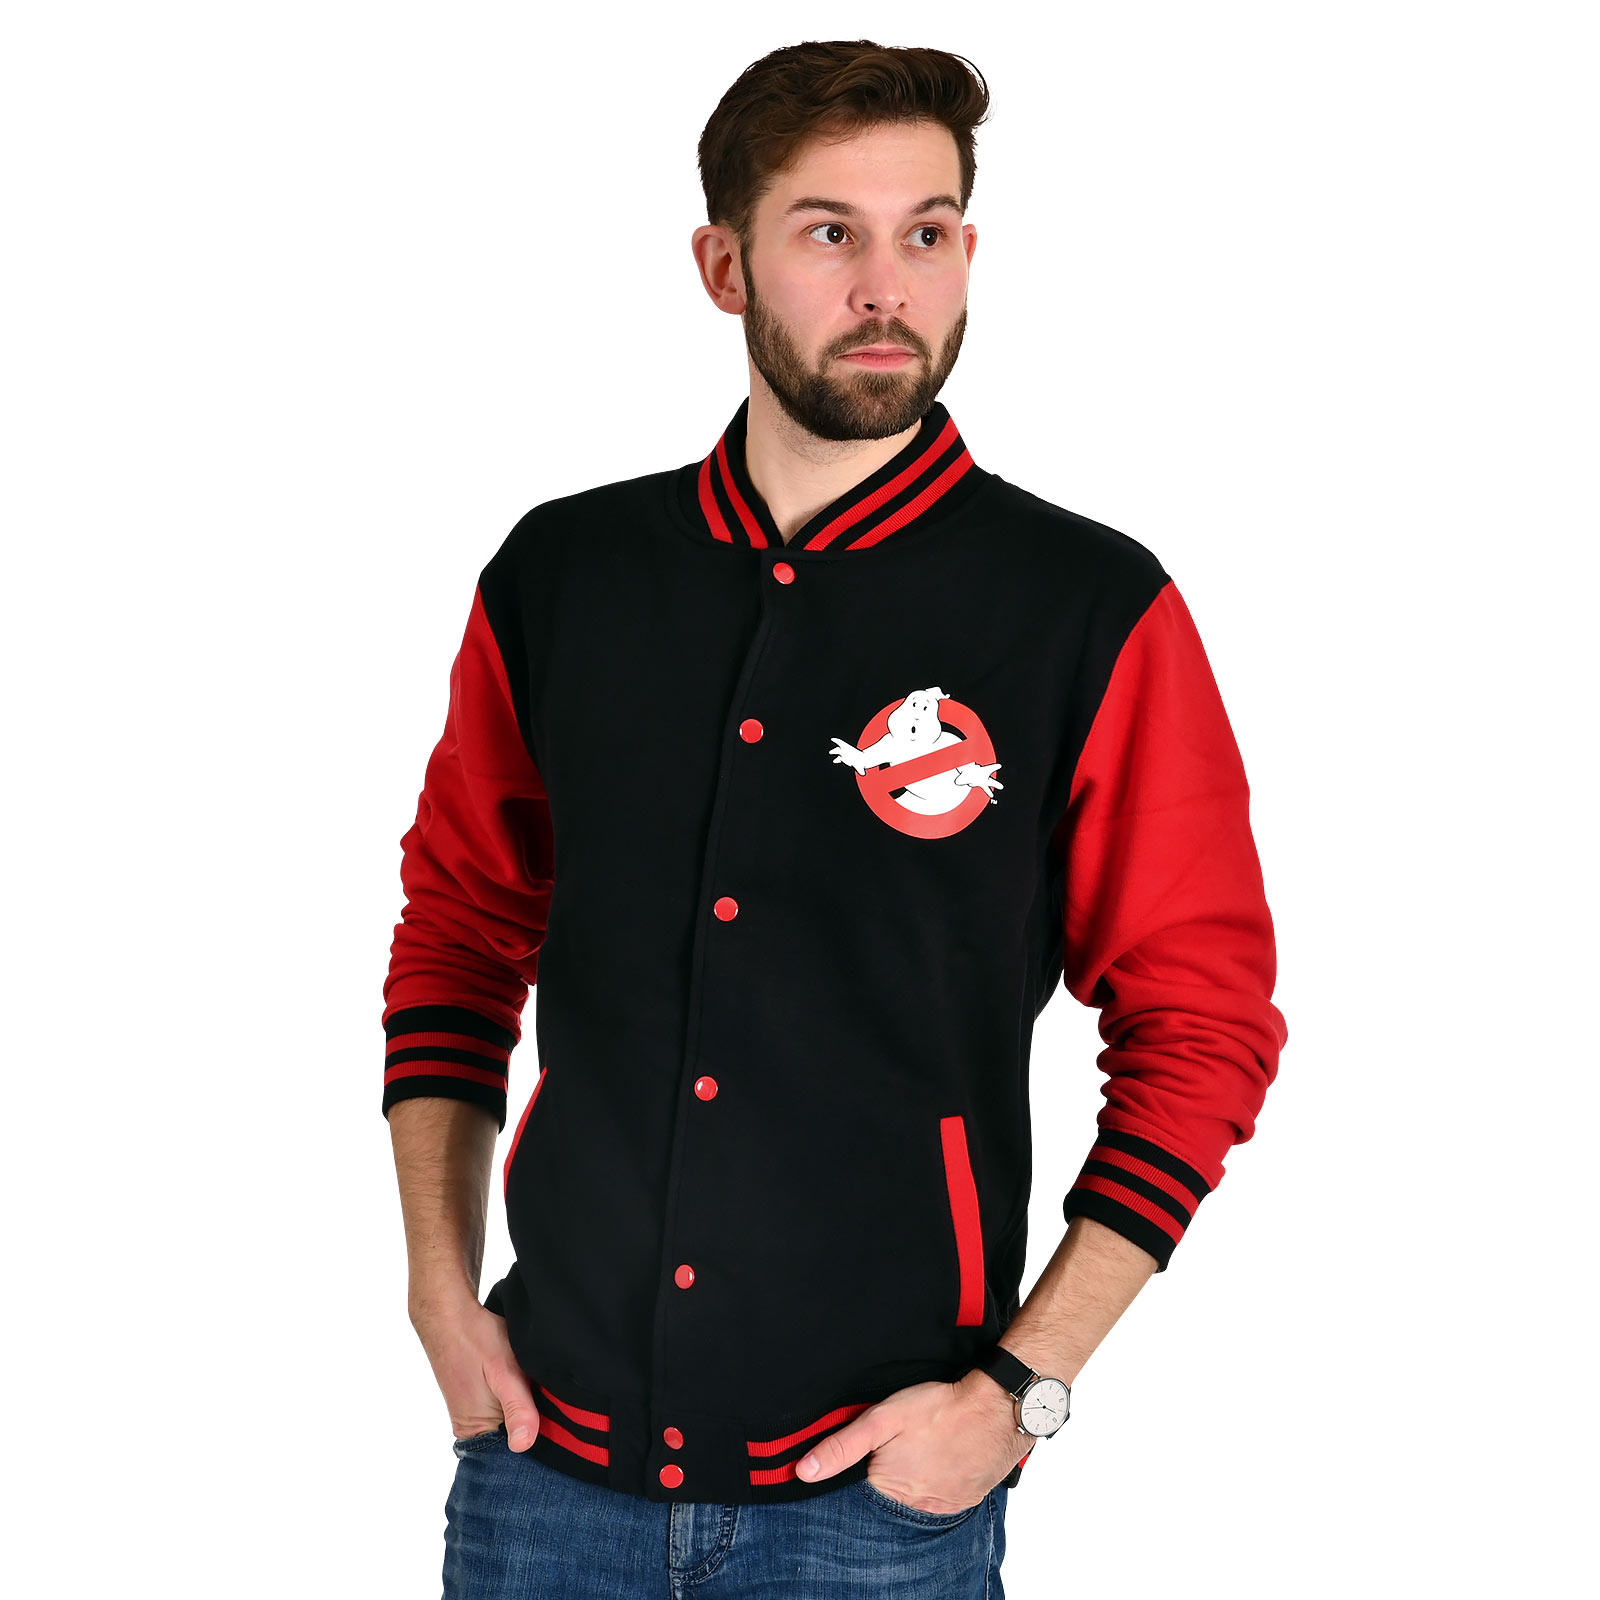 Ghostbusters - Ain't Afraid of No Ghost College Jacke